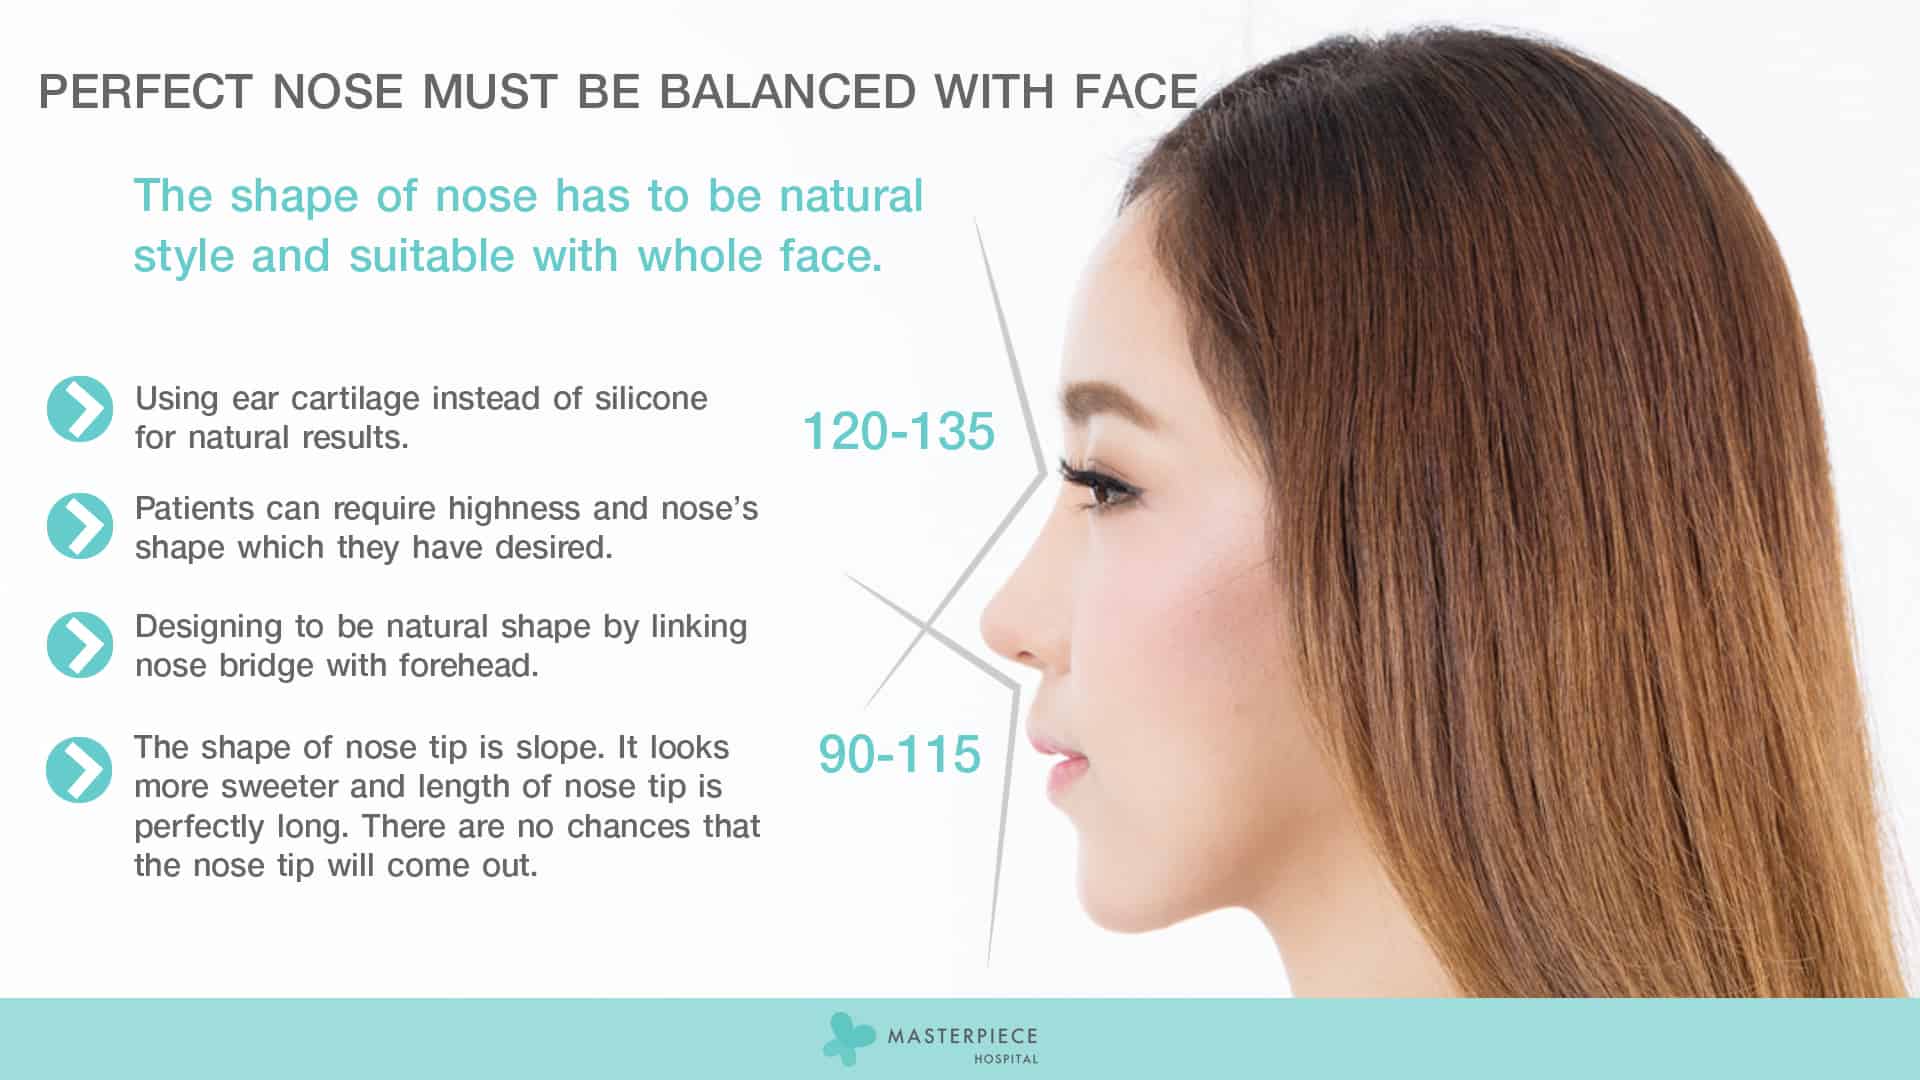 Perfect Nose must be balanced with face